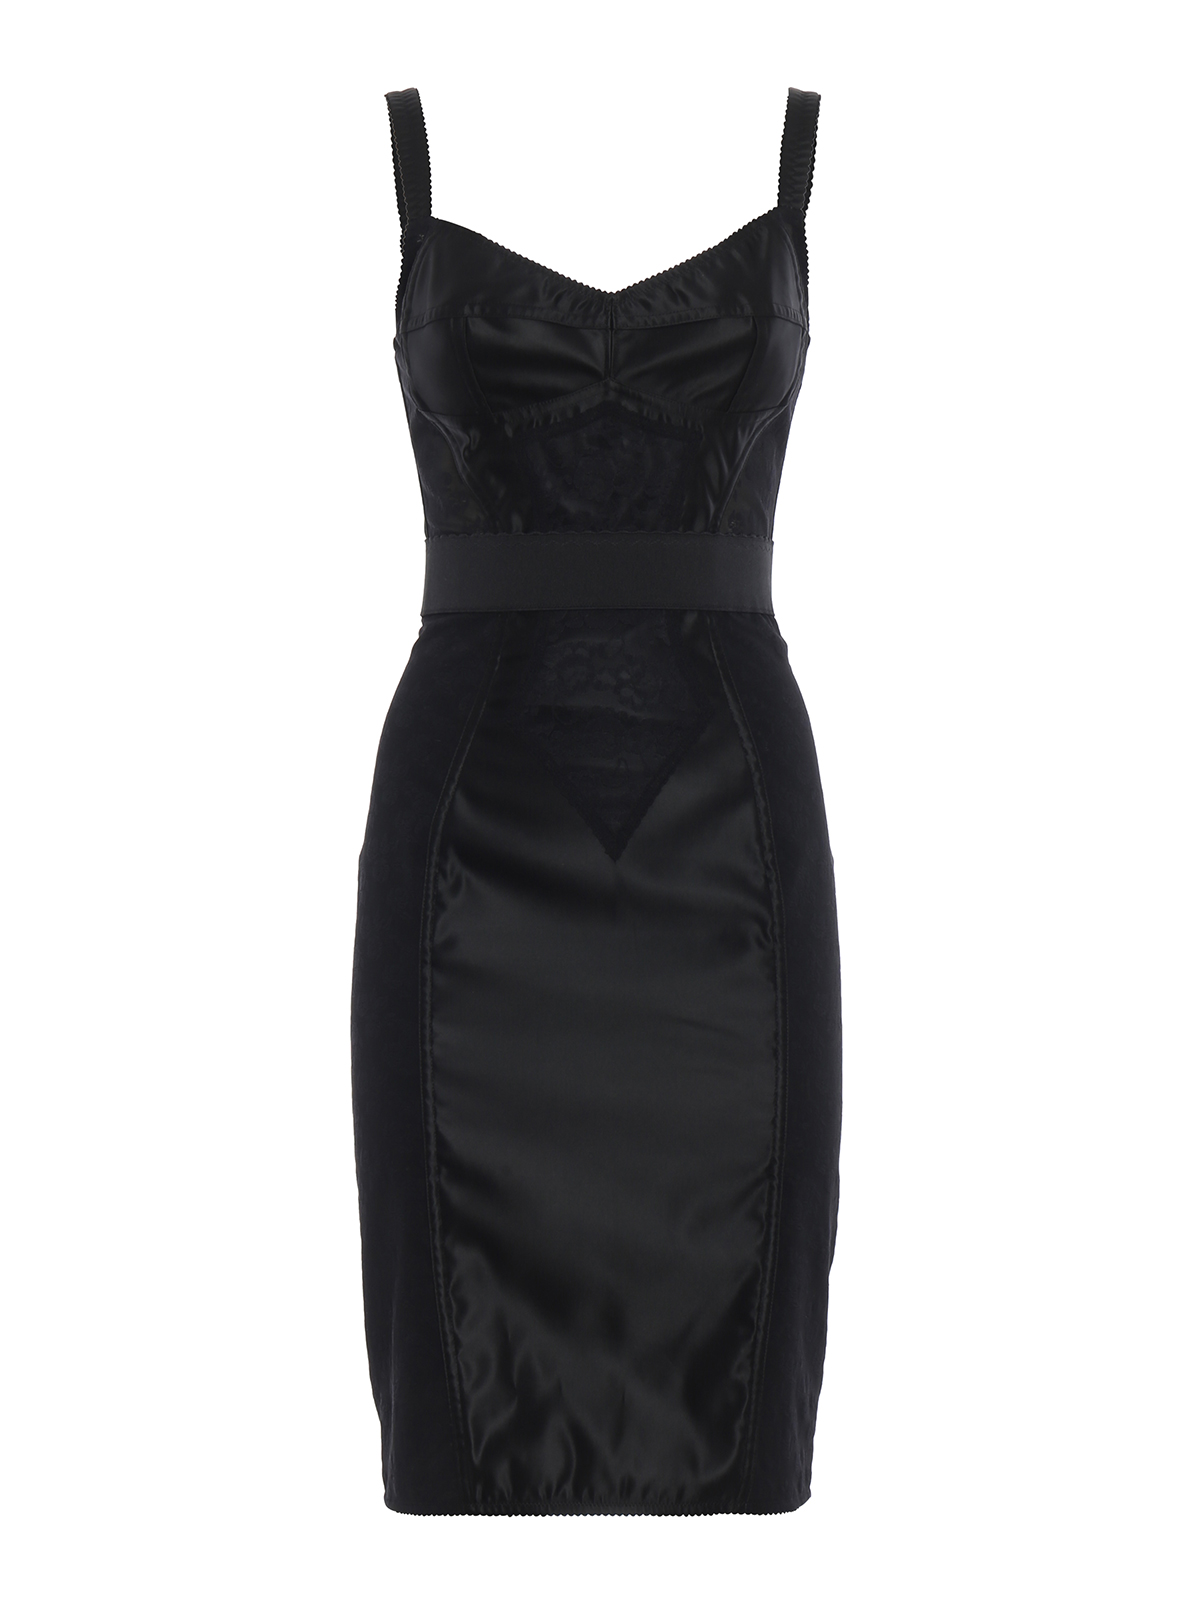 Evening dresses Dolce & Gabbana - Satin and lace fitted corset dress -  F6RA2TG9921N0000